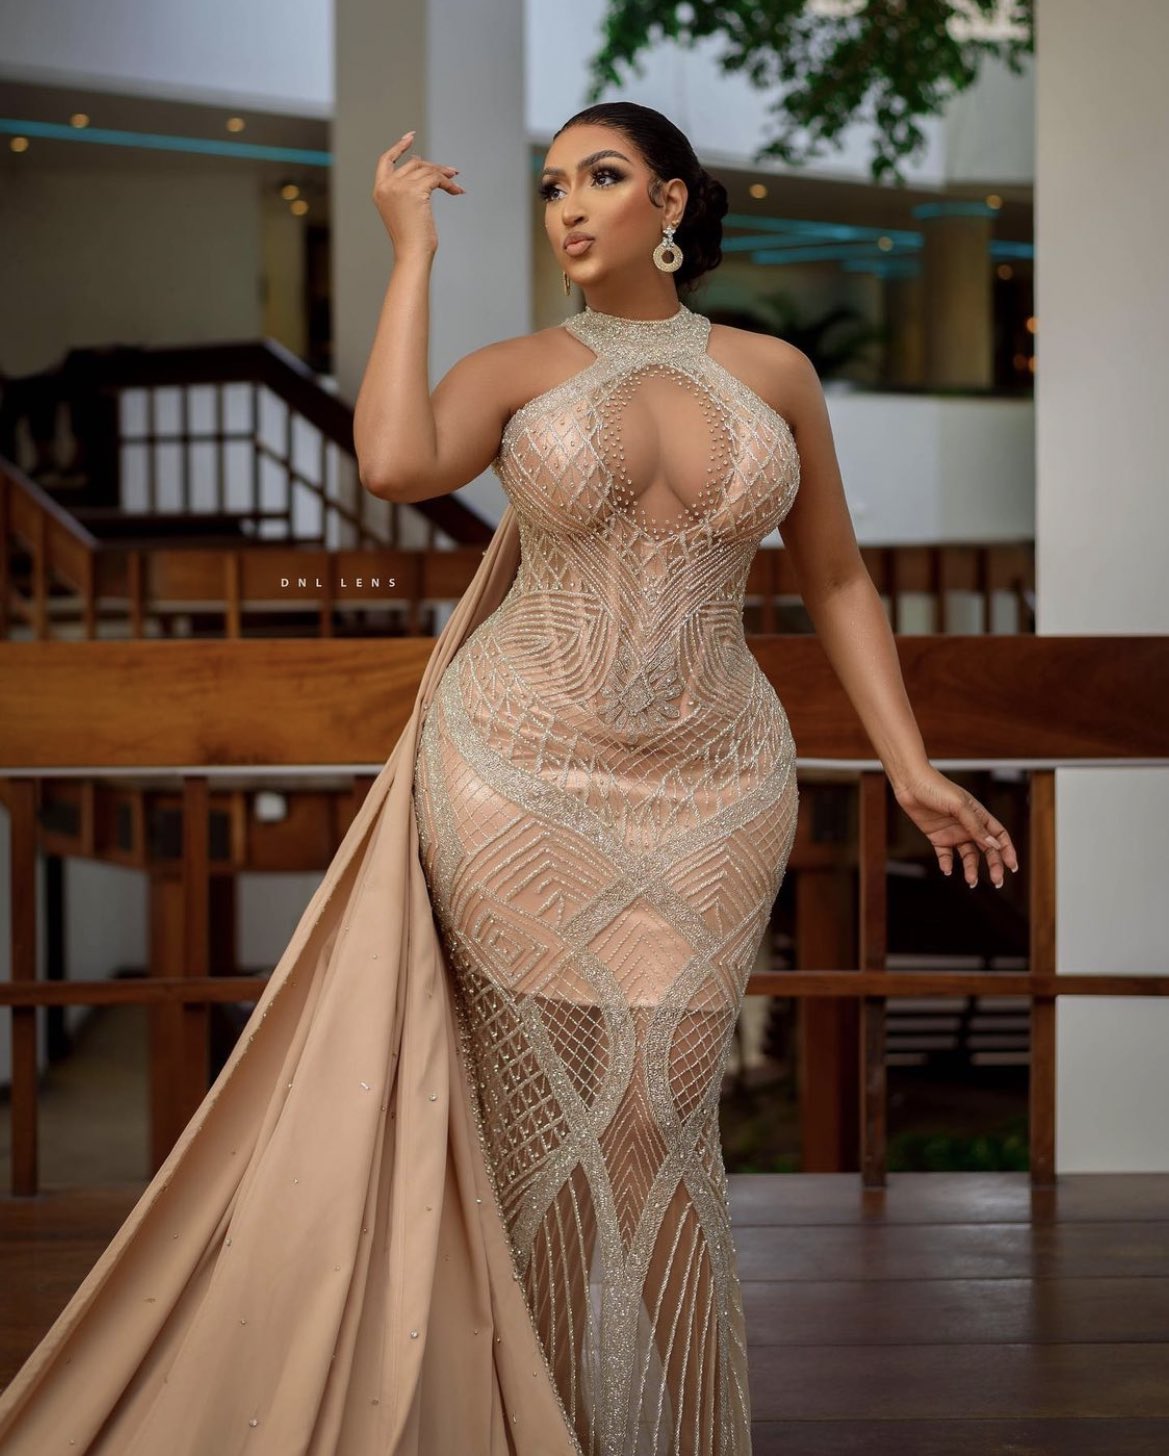 These are the best Africa Magic Viewers’ Choice Awards looks worn by Nollywood celebrities. The Africa Magic Viewers’ Choice Awards 2022, here are the best dresses. Best Africa Magic Viewers’ Choice Awards 2022 Africa Magic Viewers’ Choice Awards 2022 outfits full list, worst Africa Magic Viewers’ Choice Awards 2022, Africa Magic Viewers’ Choice Awards 2022 red carpet. amvca meaning, amvca 2022 nominations, amvca 2022 dates, amvca 2022 nominees list, amvca 2022 nominees and winners, amvca 2022 date and time, amvca best dressed 2022, amvca 2022 winners list, amvca 2022 best dressed male, amvca 2022 venue.